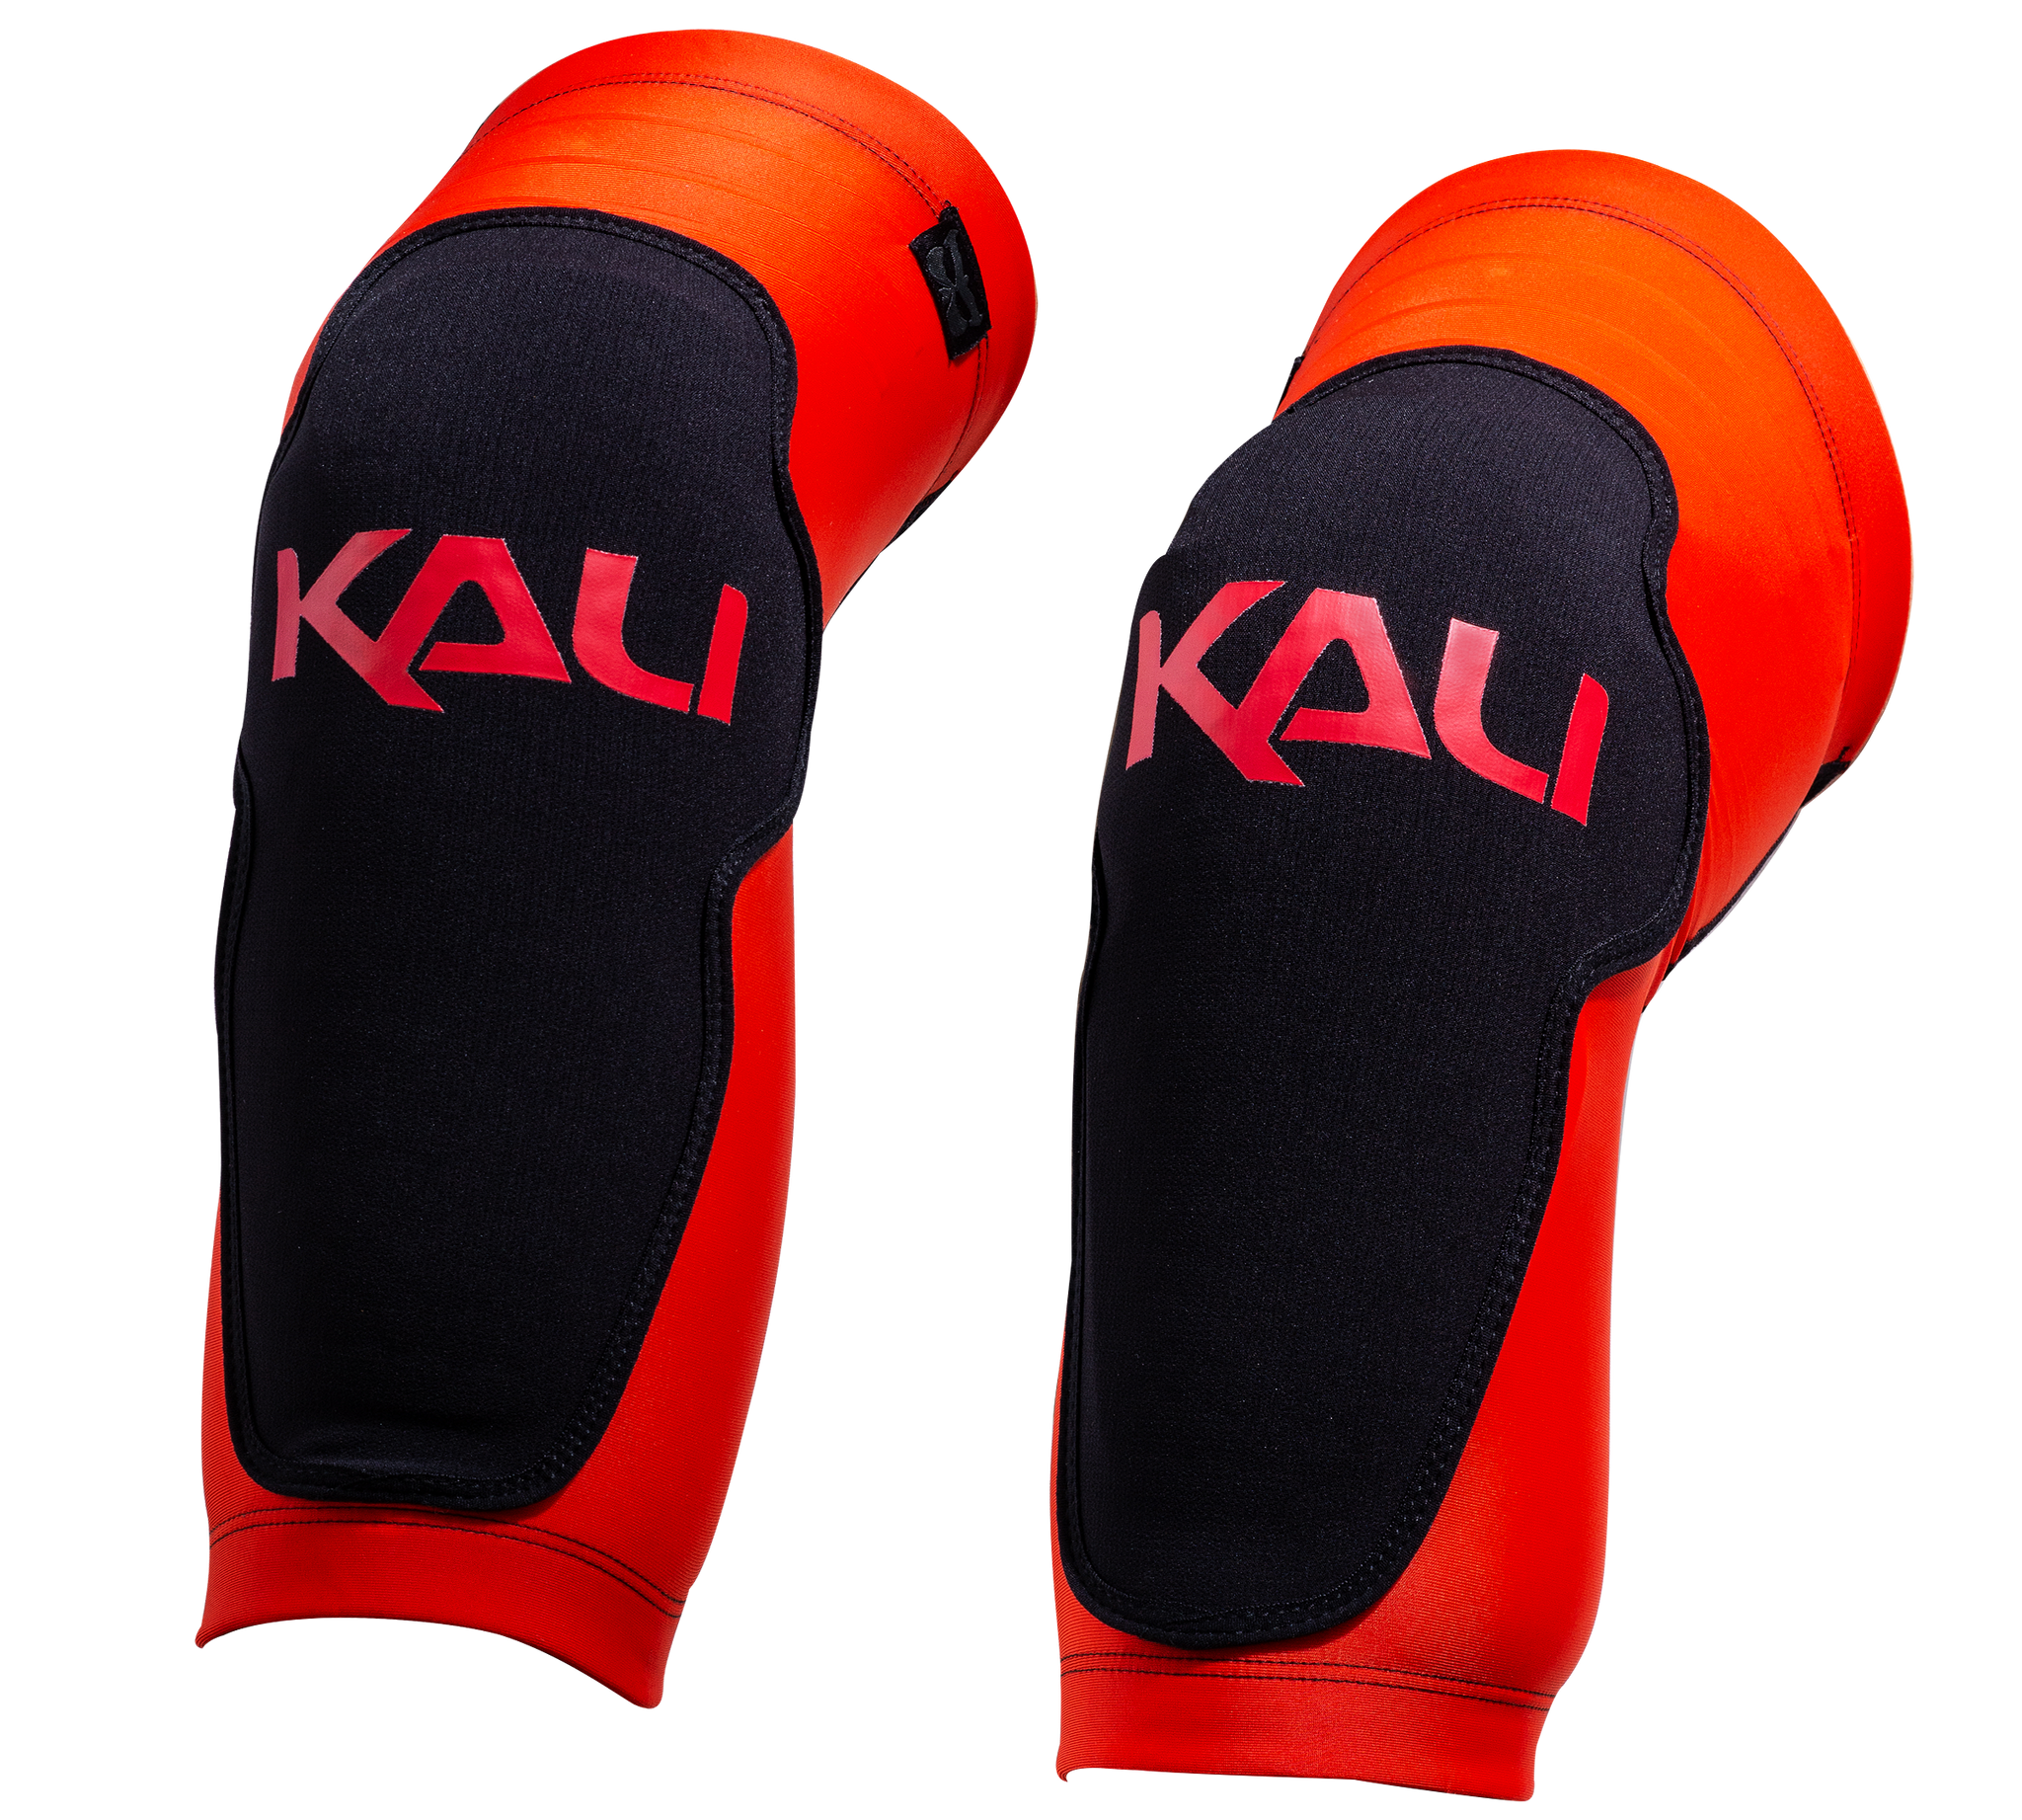 Mission Knee Guards